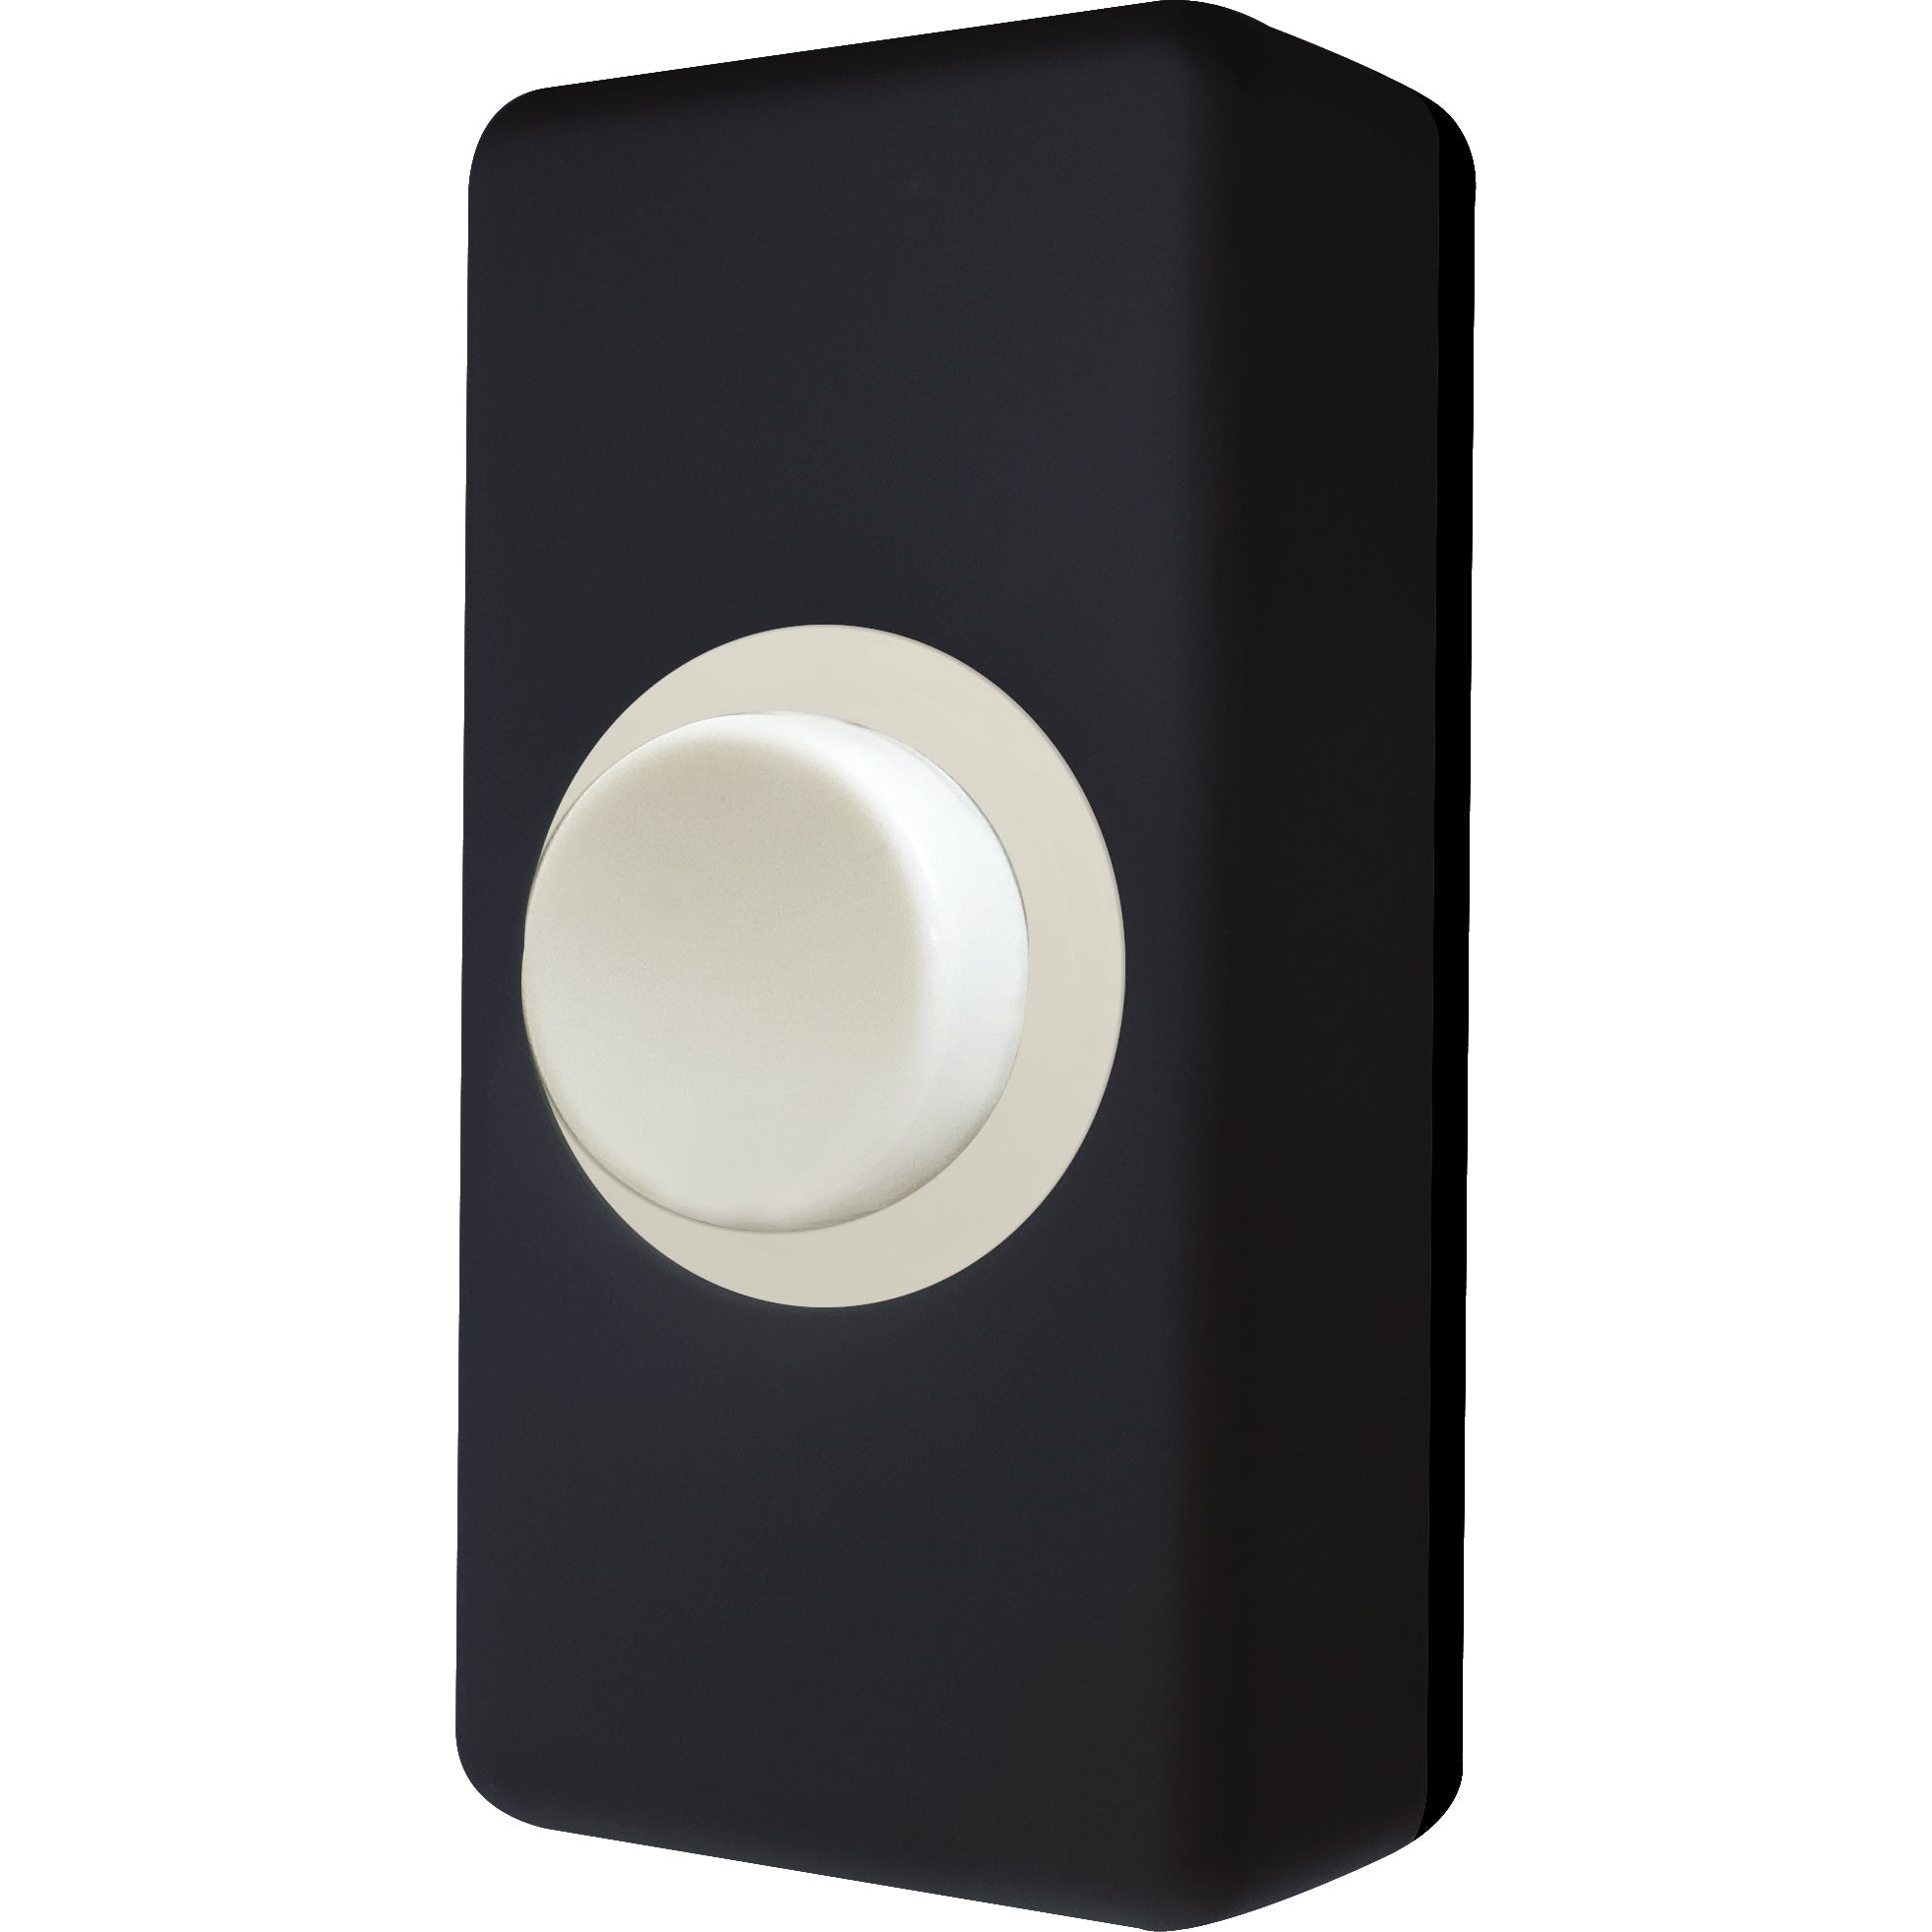 Eterna BPWB Wired Surface Mounted Bell Push